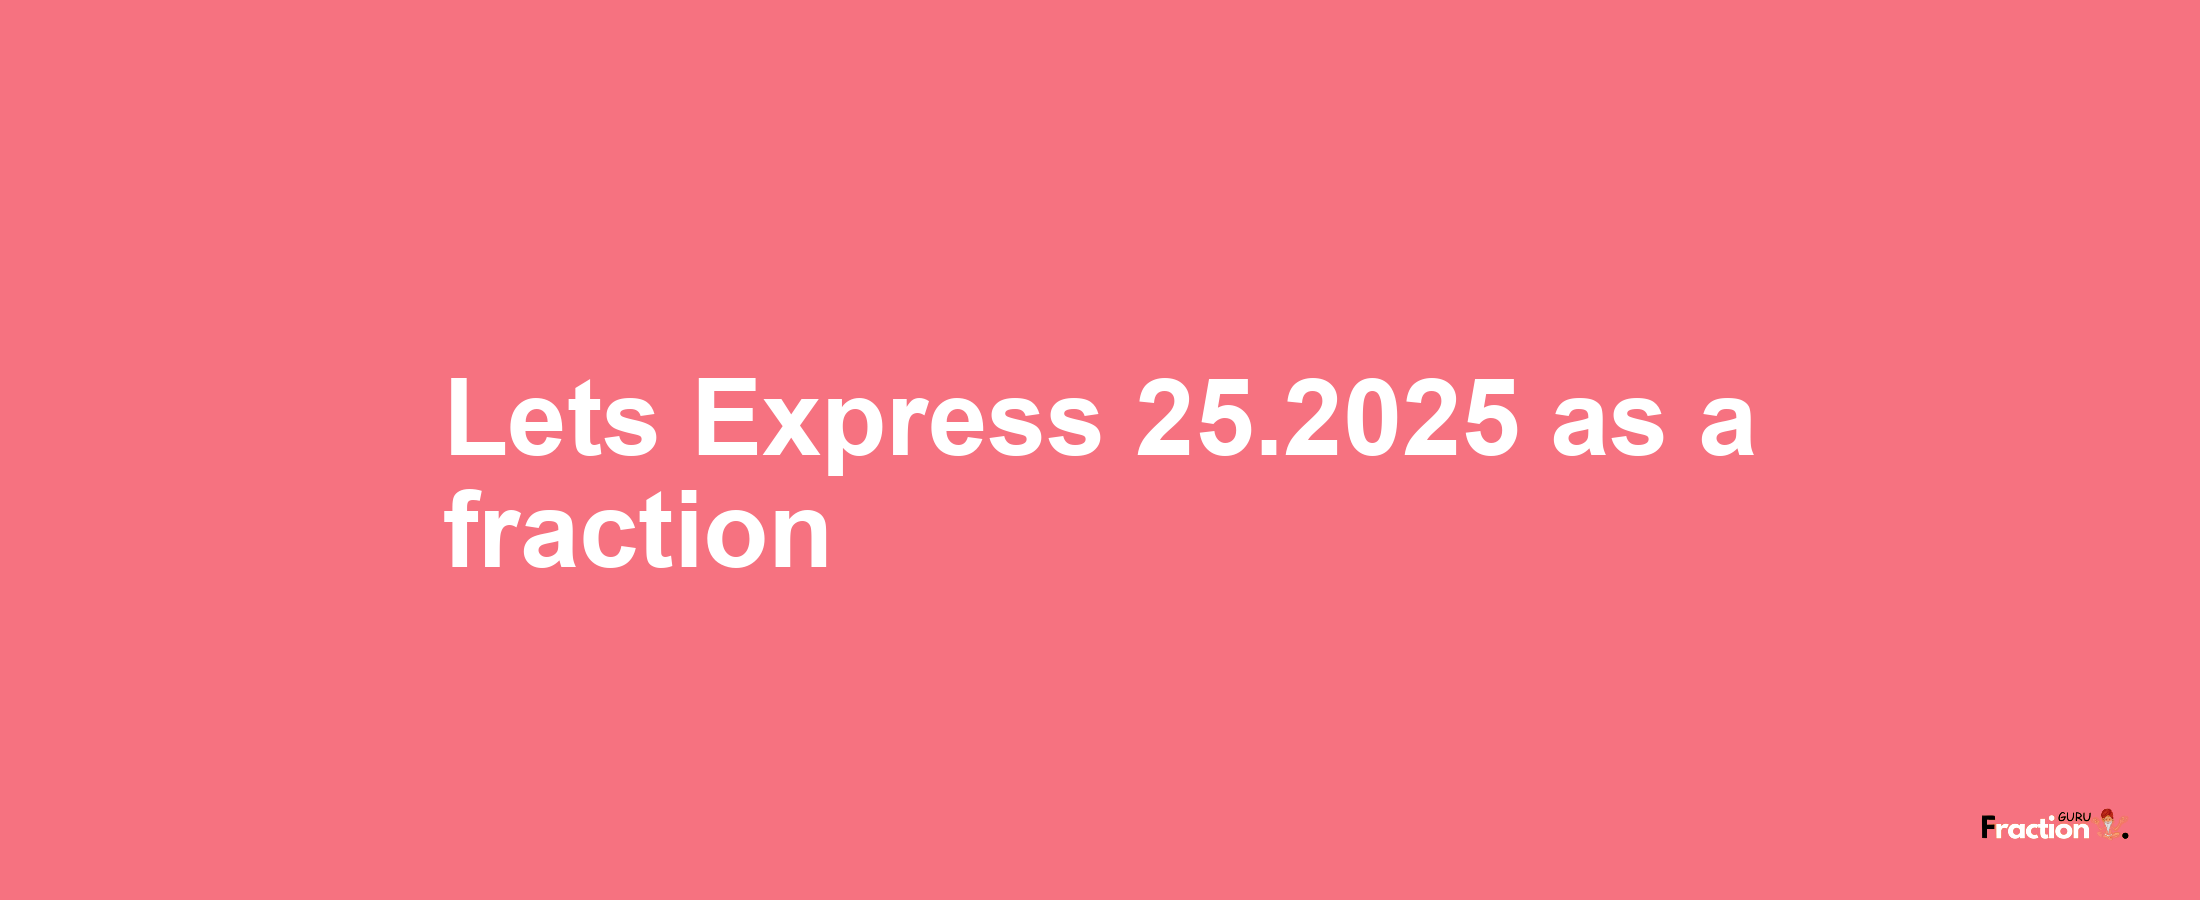 Lets Express 25.2025 as afraction